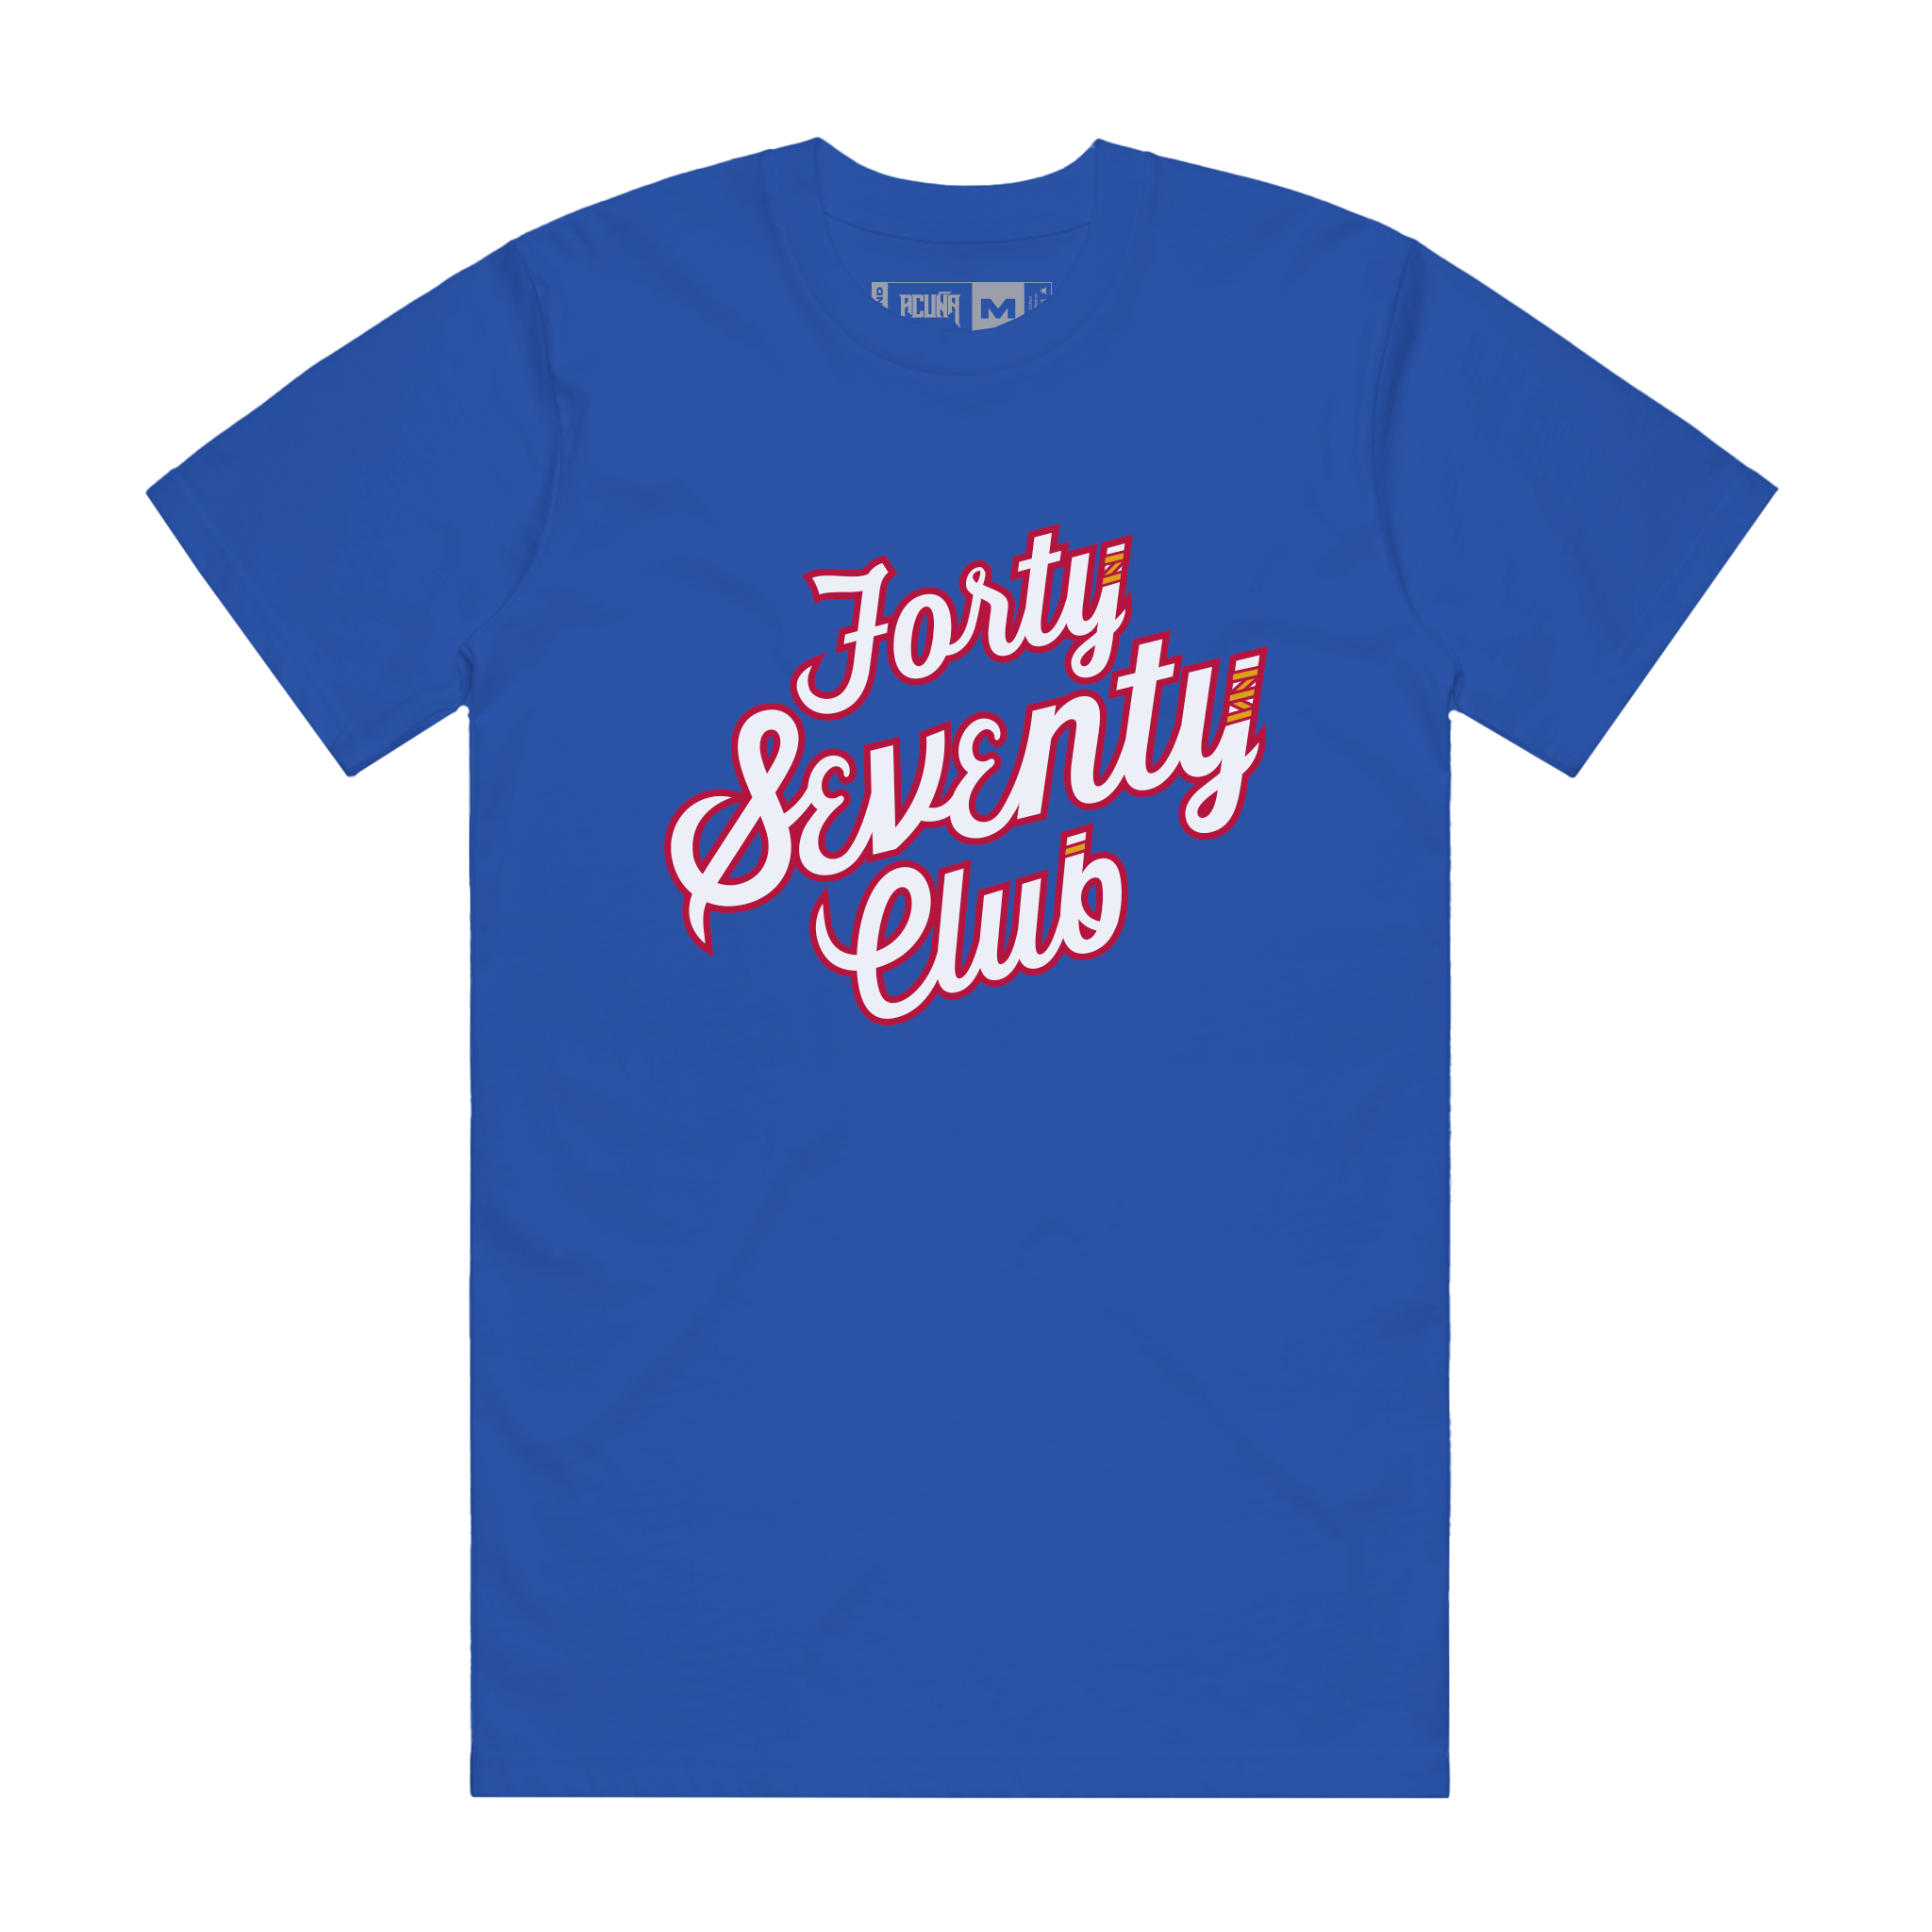 Front image of the Blue Crew Neck Tee Shirt with Short Sleeves featuring 'Forty Seventy Club' printed in white with red borders